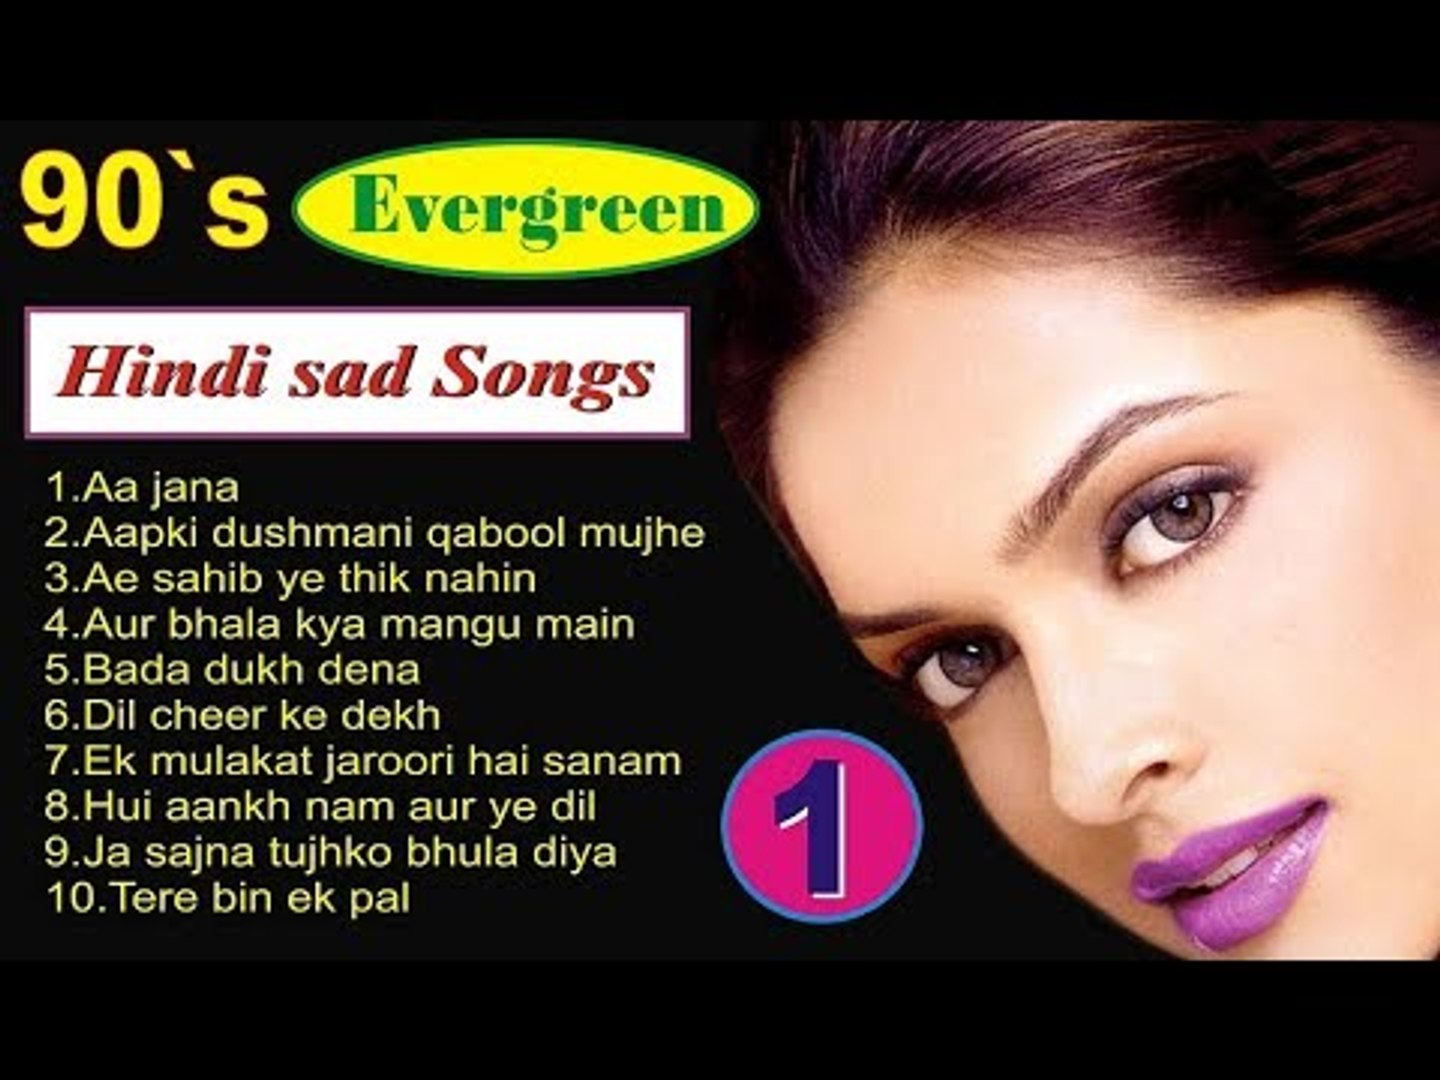 Hindi Sad Songs Best Of 90 S Sad Songs Part 1 Zili Music Company Video Dailymotion